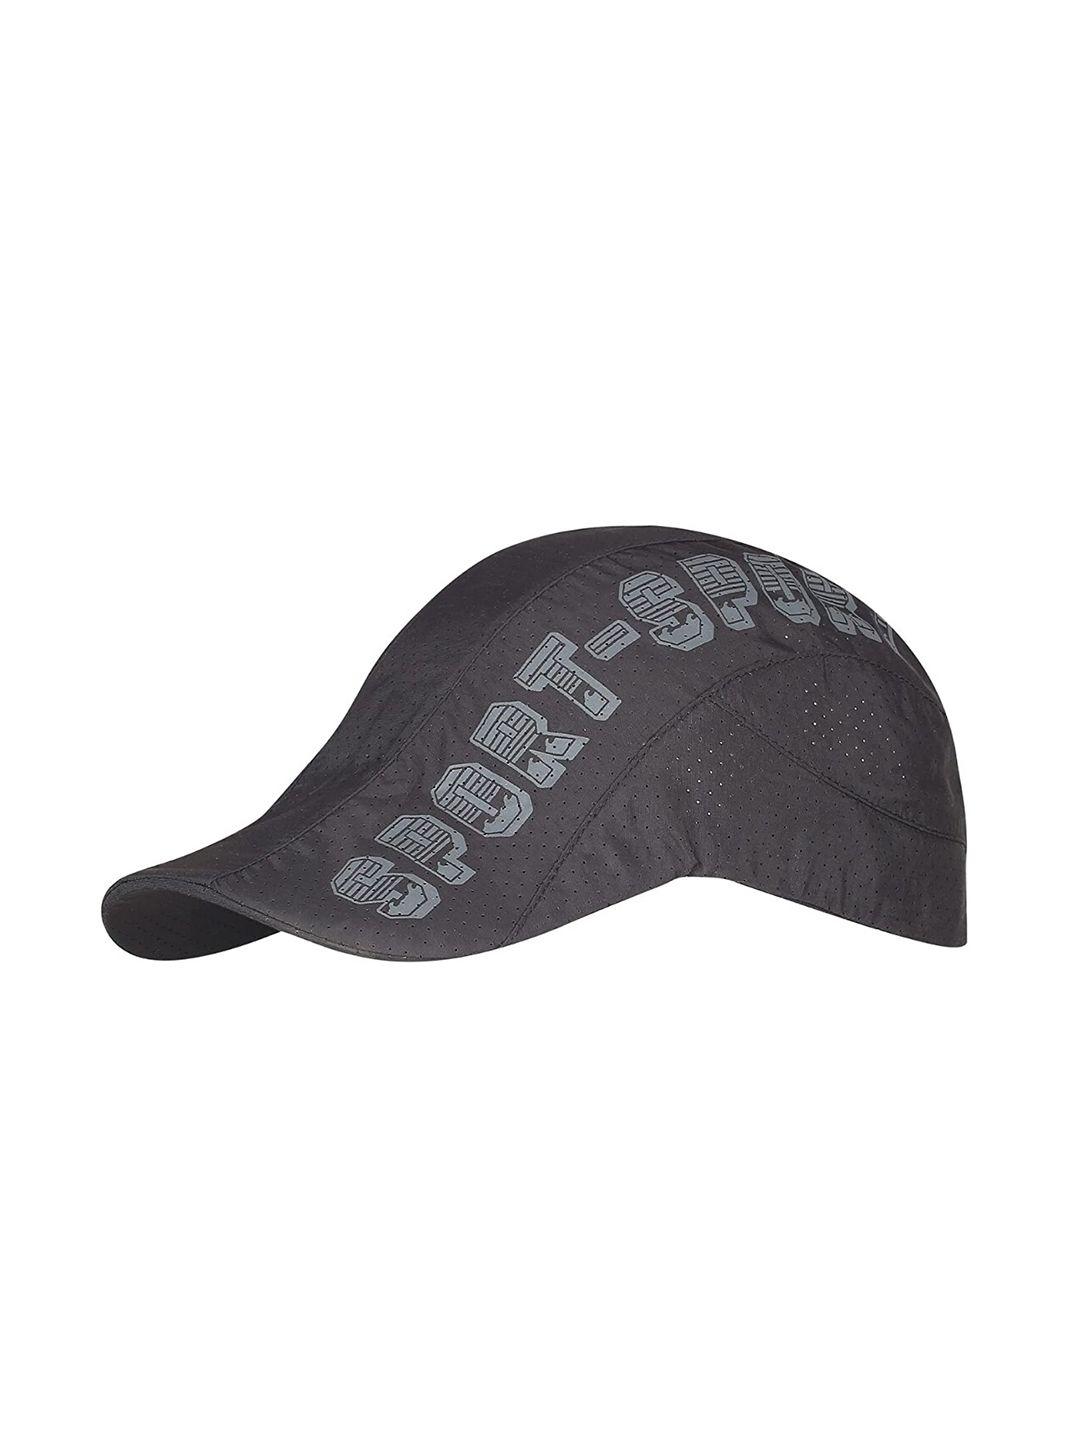 isweven printed light weight baseball cap